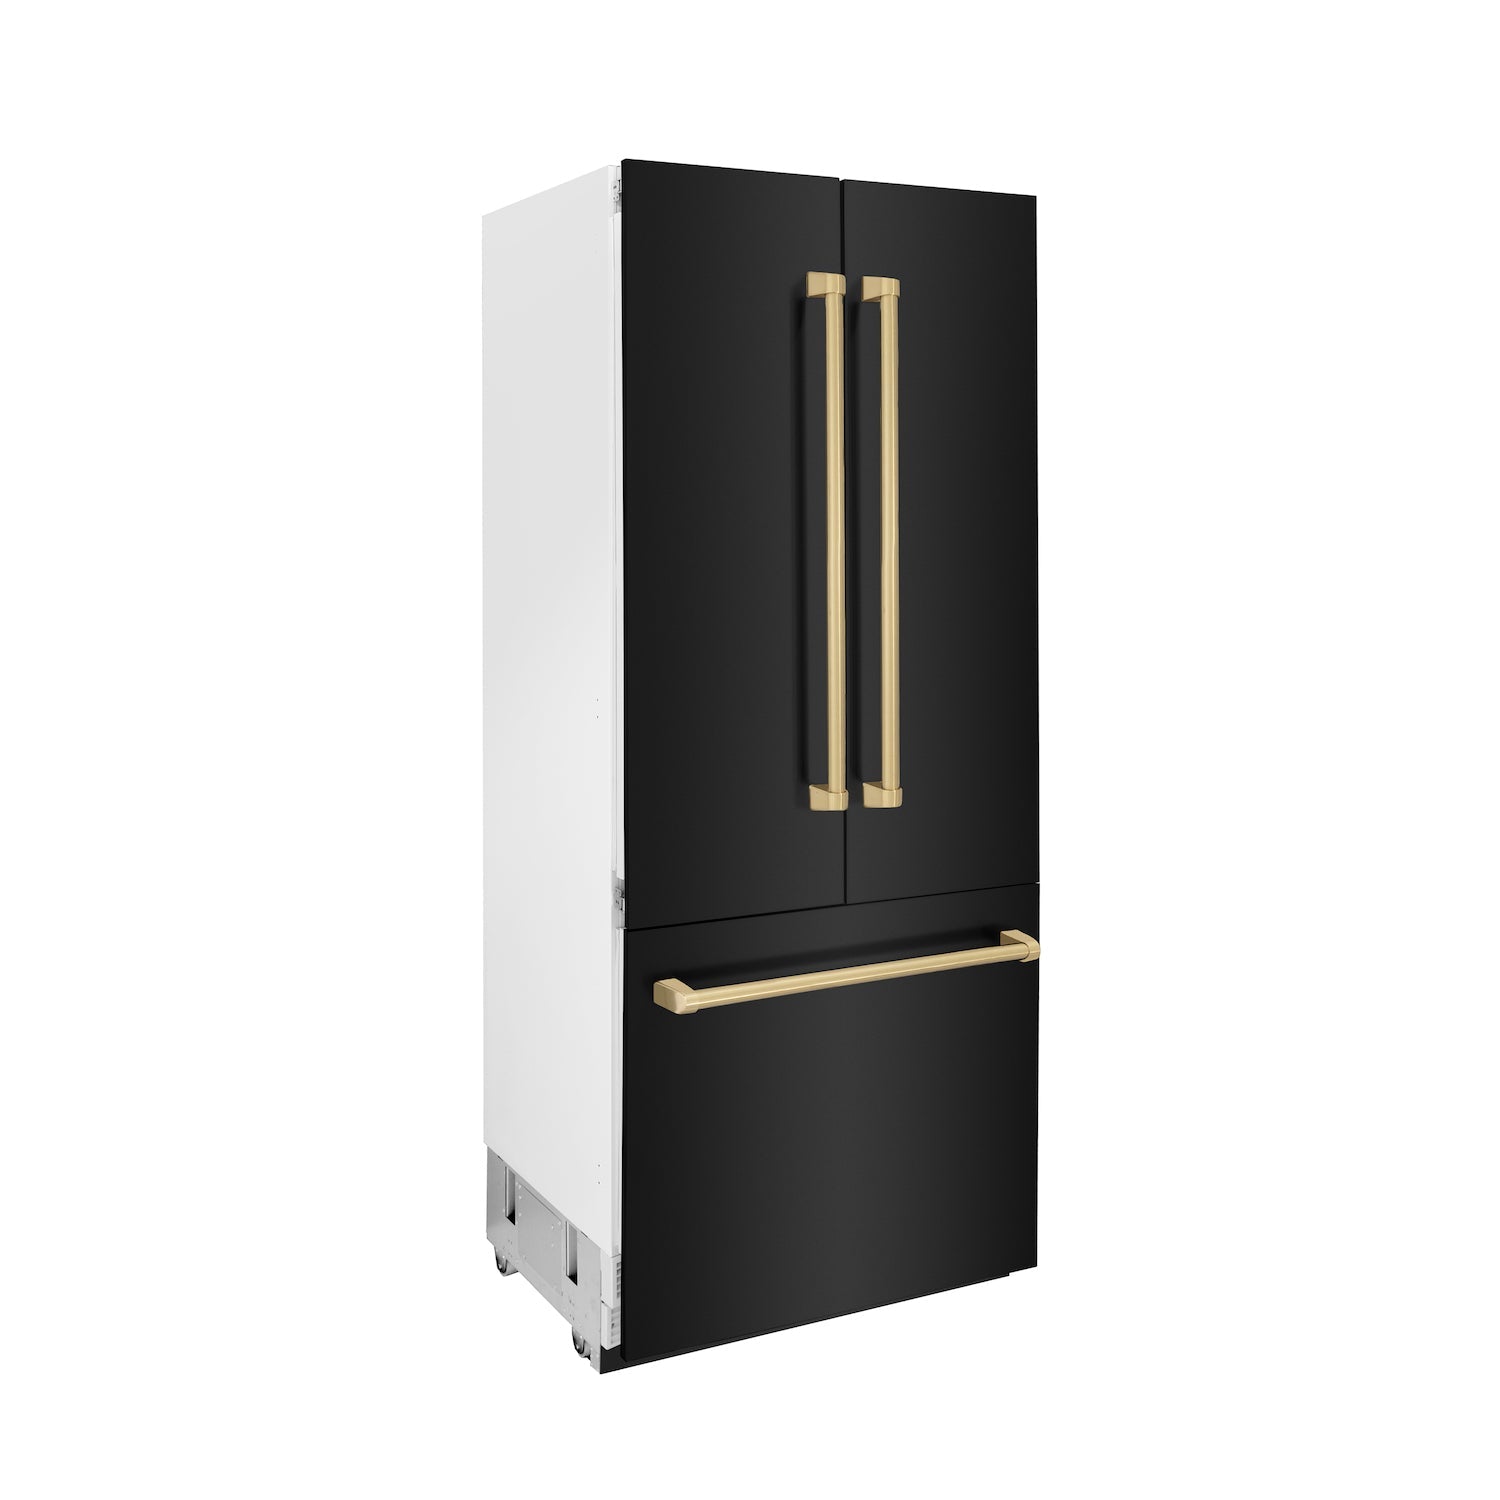 ZLINE 36" Autograph Edition Built-in 2-Door Bottom Freezer Refrigerator - Black Stainless Steel with Champagne Bronze Accents, Internal Water and Ice Dispenser